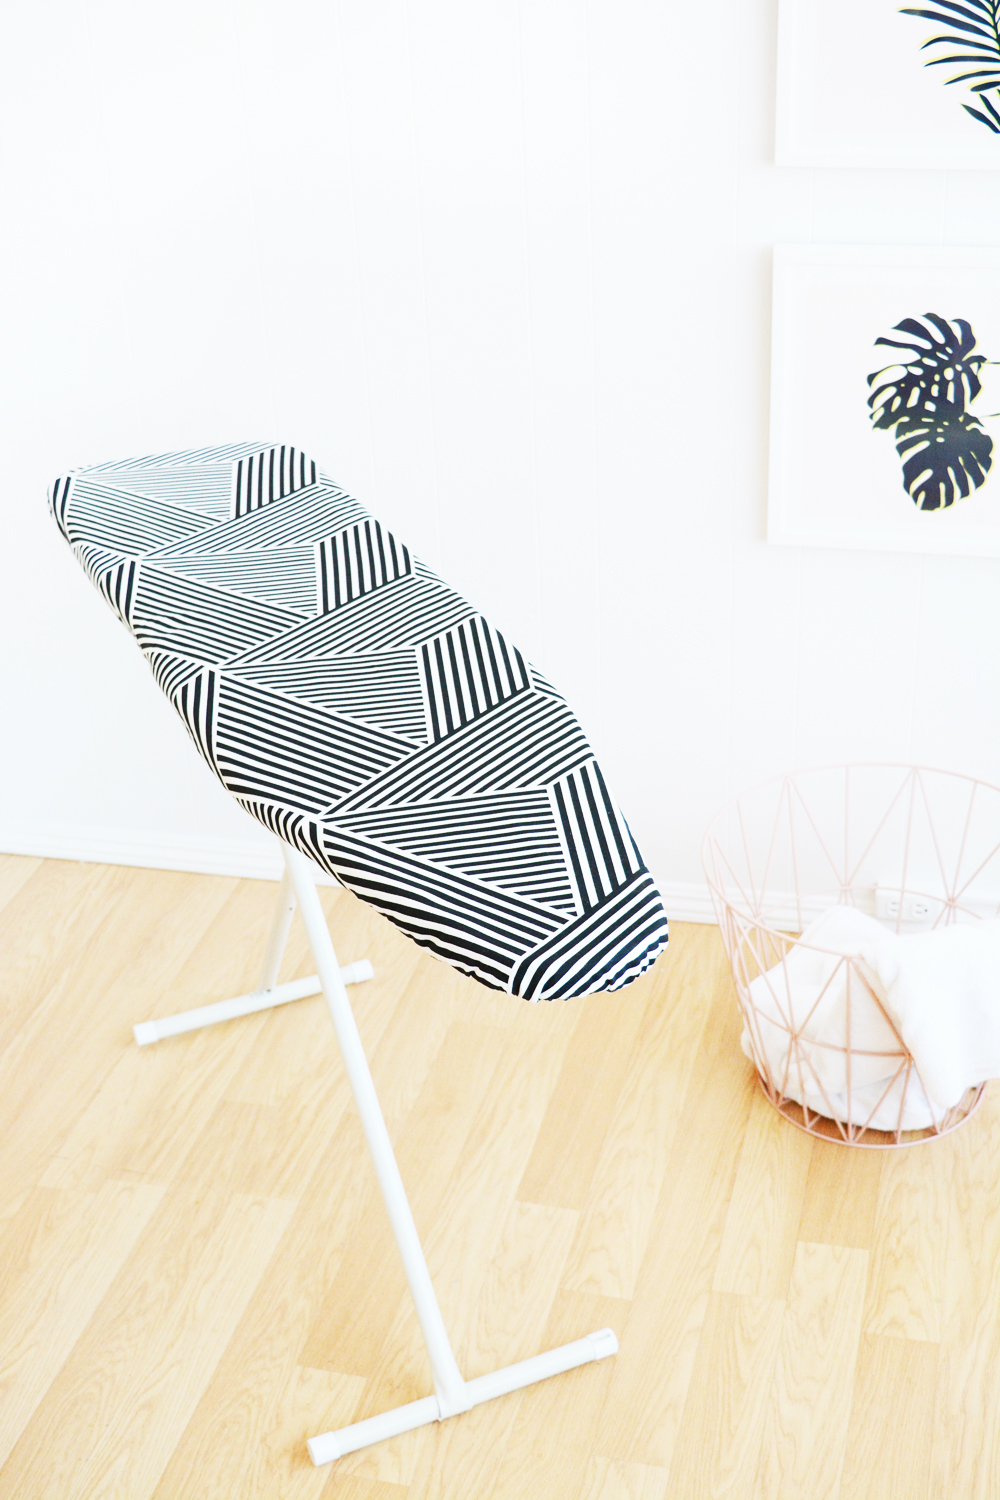 Make this DIY ironing board cover in about an hour. Pattern and full how-to instructions provided for any size/shape ironing board. 